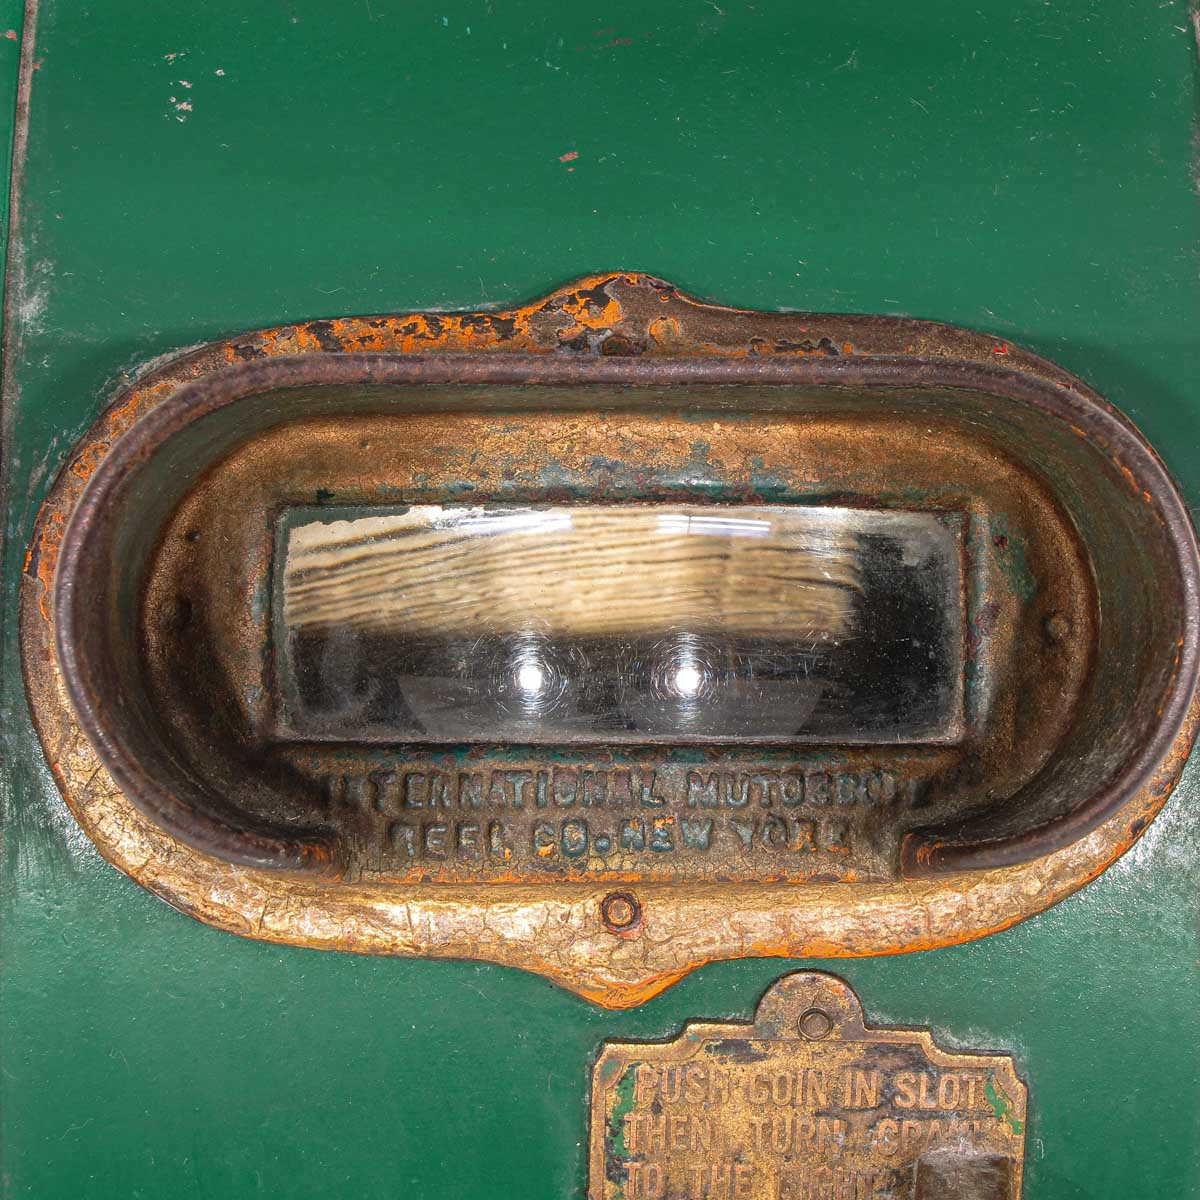 A Whispering Smith Rides Mutoscope - Image 7 of 10